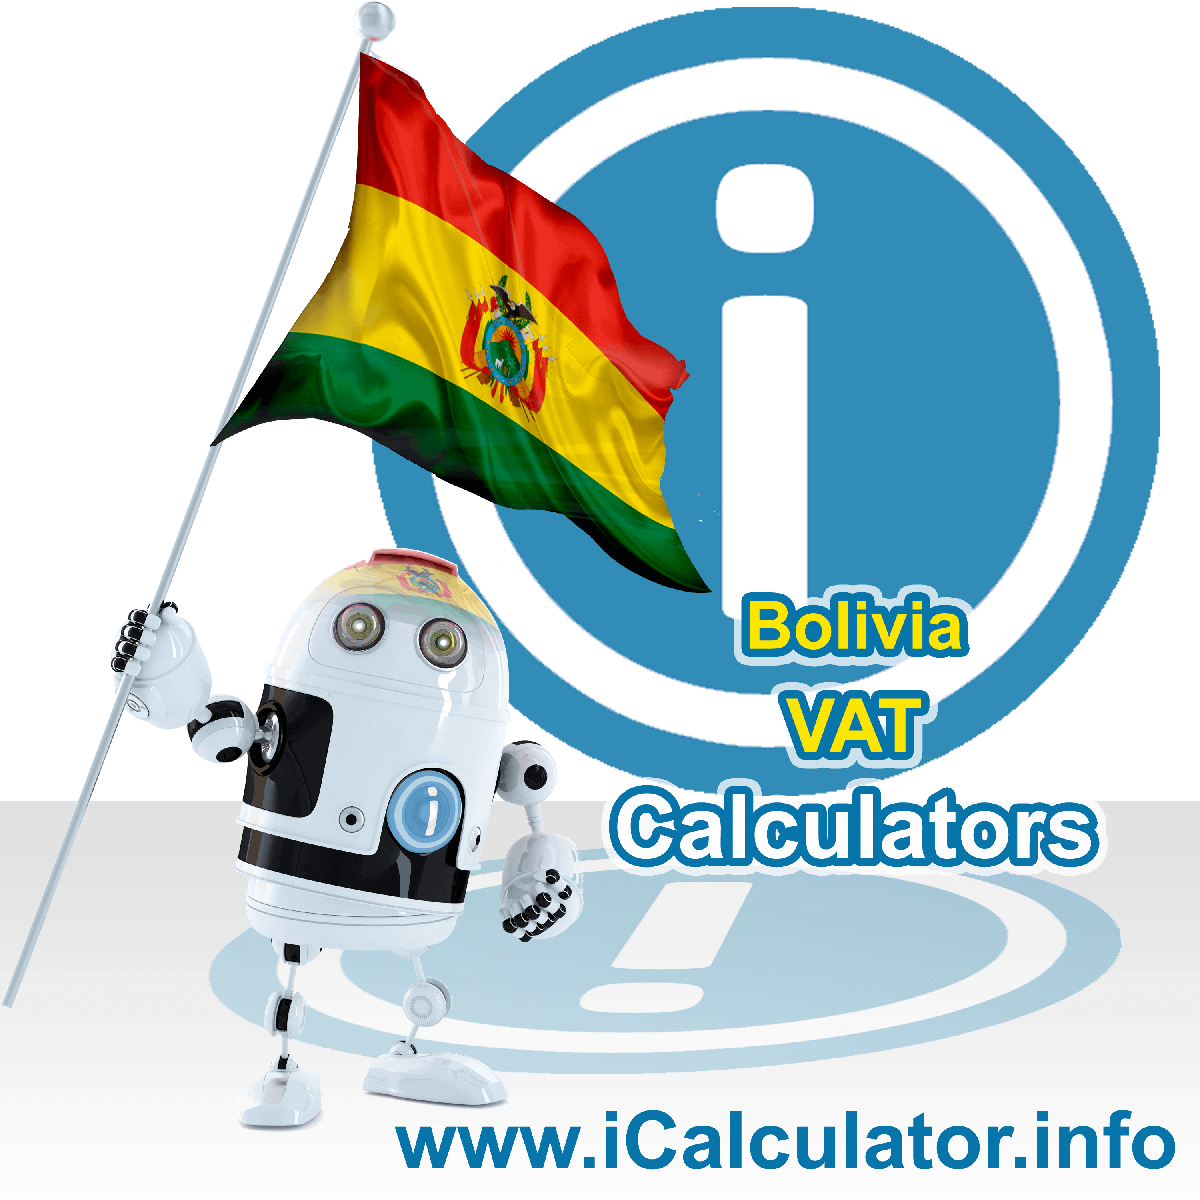 Bolivia VAT Calculator. This image shows the Bolivia flag and information relating to the VAT formula used for calculating Value Added Tax in Bolivia using the Bolivia VAT Calculator in 2023